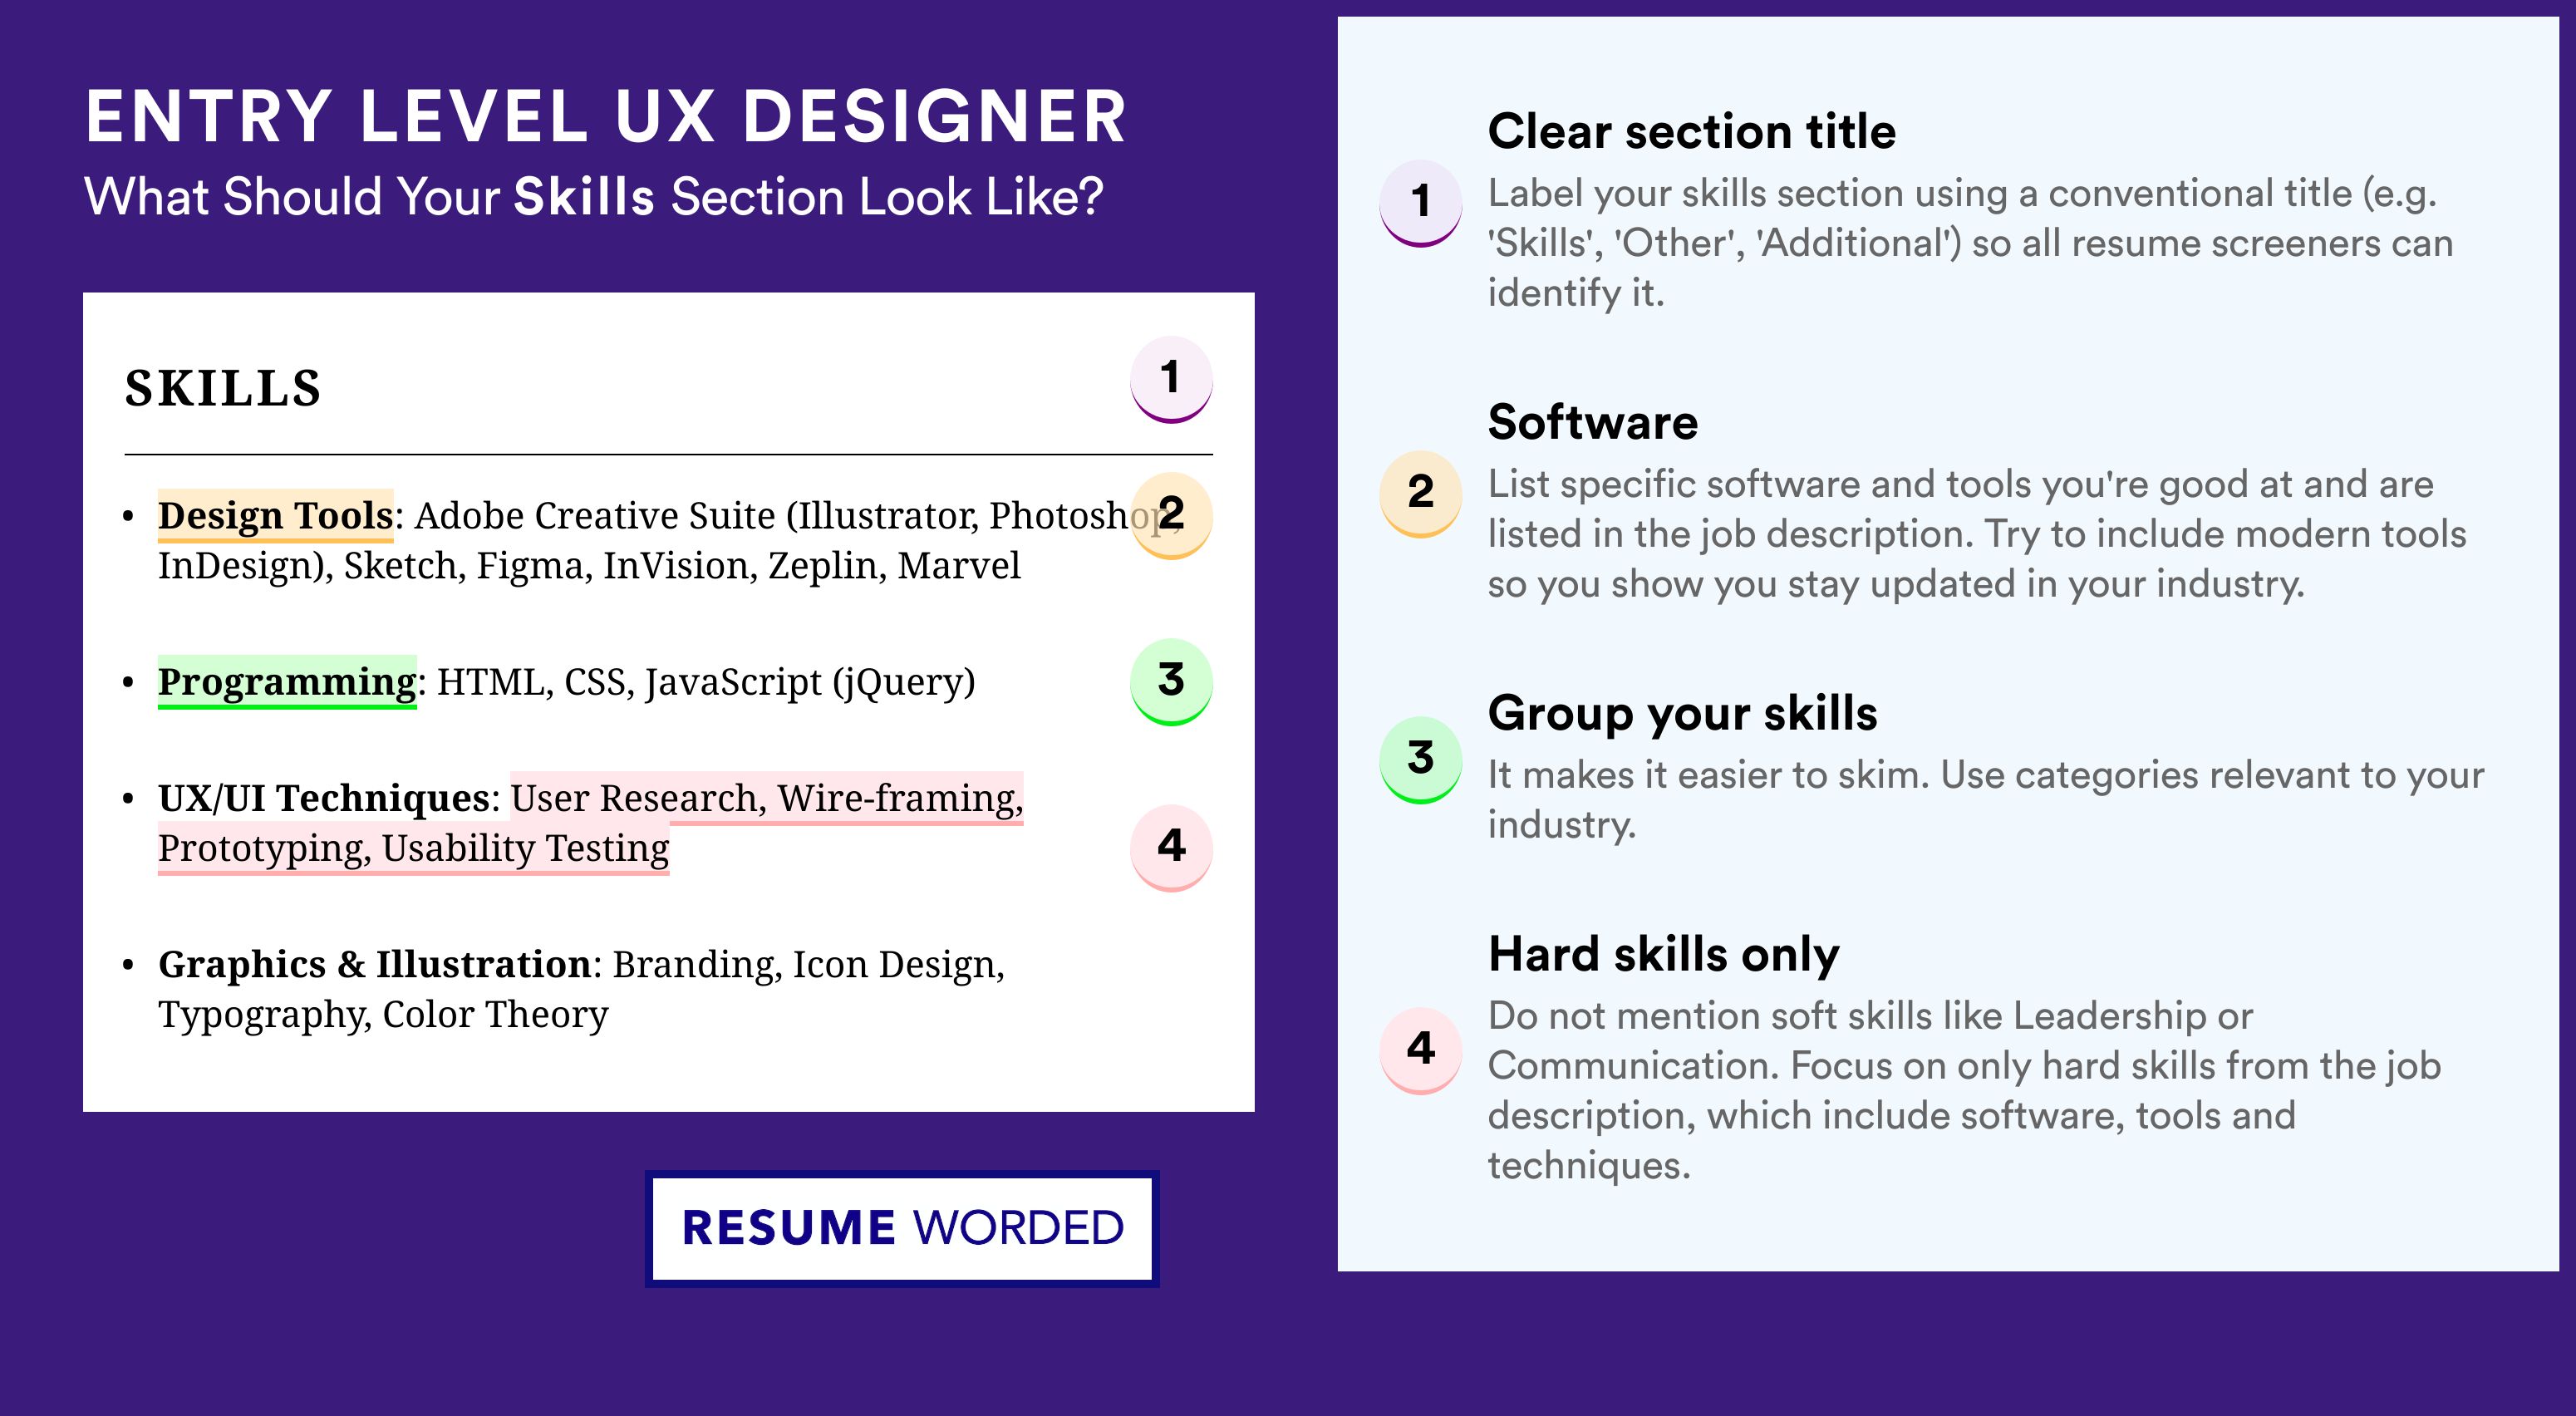 How To Write Your Skills Section - Entry Level UX Designer Roles